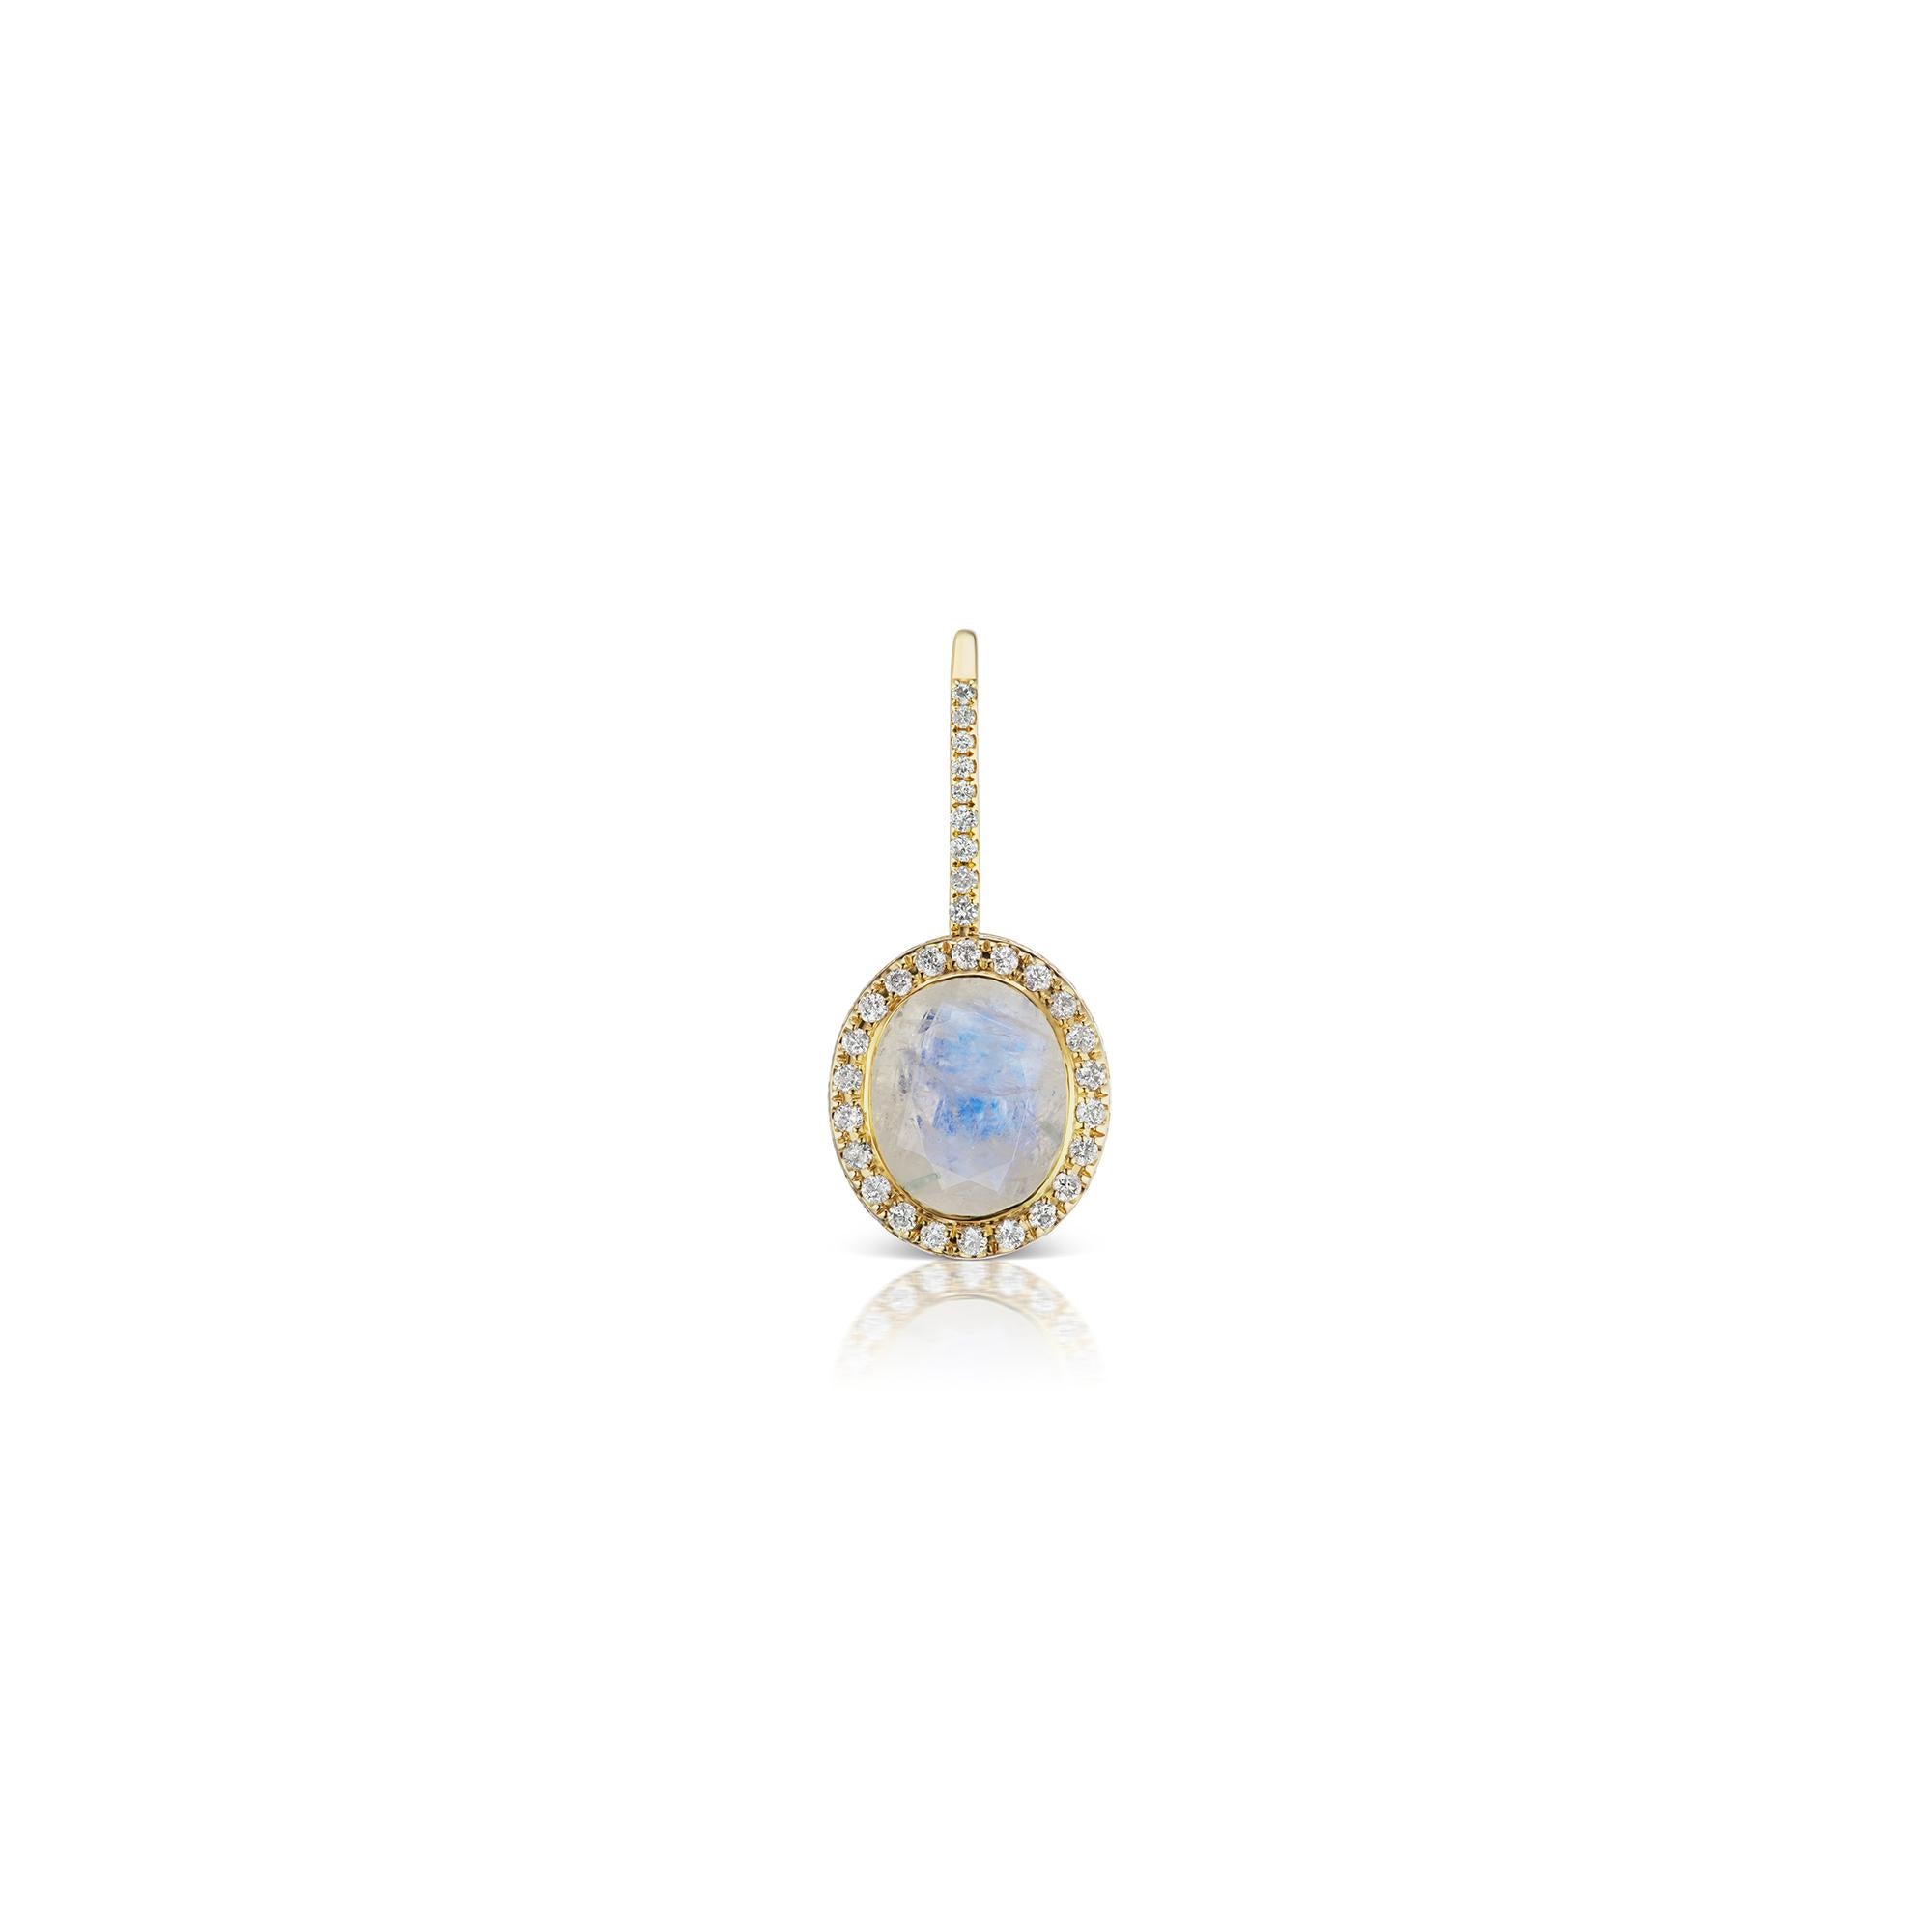 14k YG Dangle Earring with Faceted Rainbow Moonstone, (5.72cts) in Diamond Halo and Pave Diamond Earwire (Dia.0.59cts).

This elegant earring style is a show stopper.  Our Rainbow Moonstone is chosen to showcase the beautiful blue flash this stone